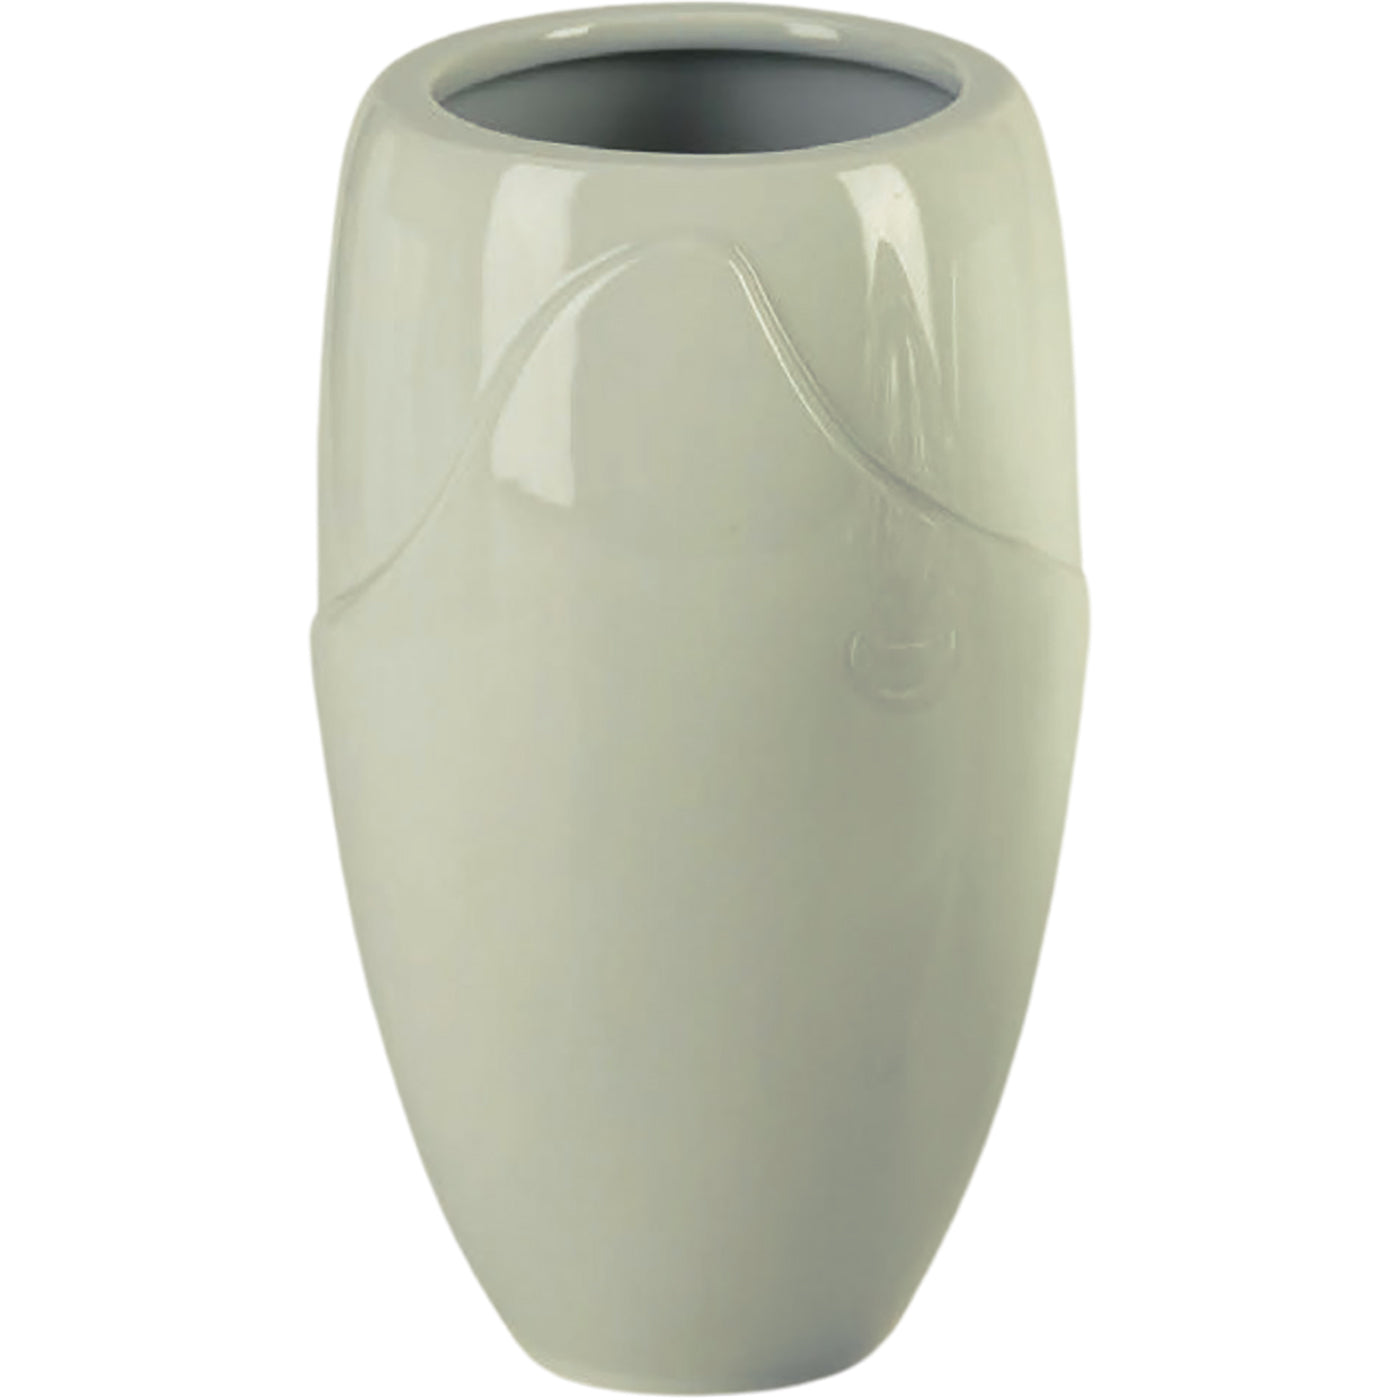 Grave vase Onda ivory 21x13cm - 8.3x5.1in In ivory porcelain, ground attached ON168P/A